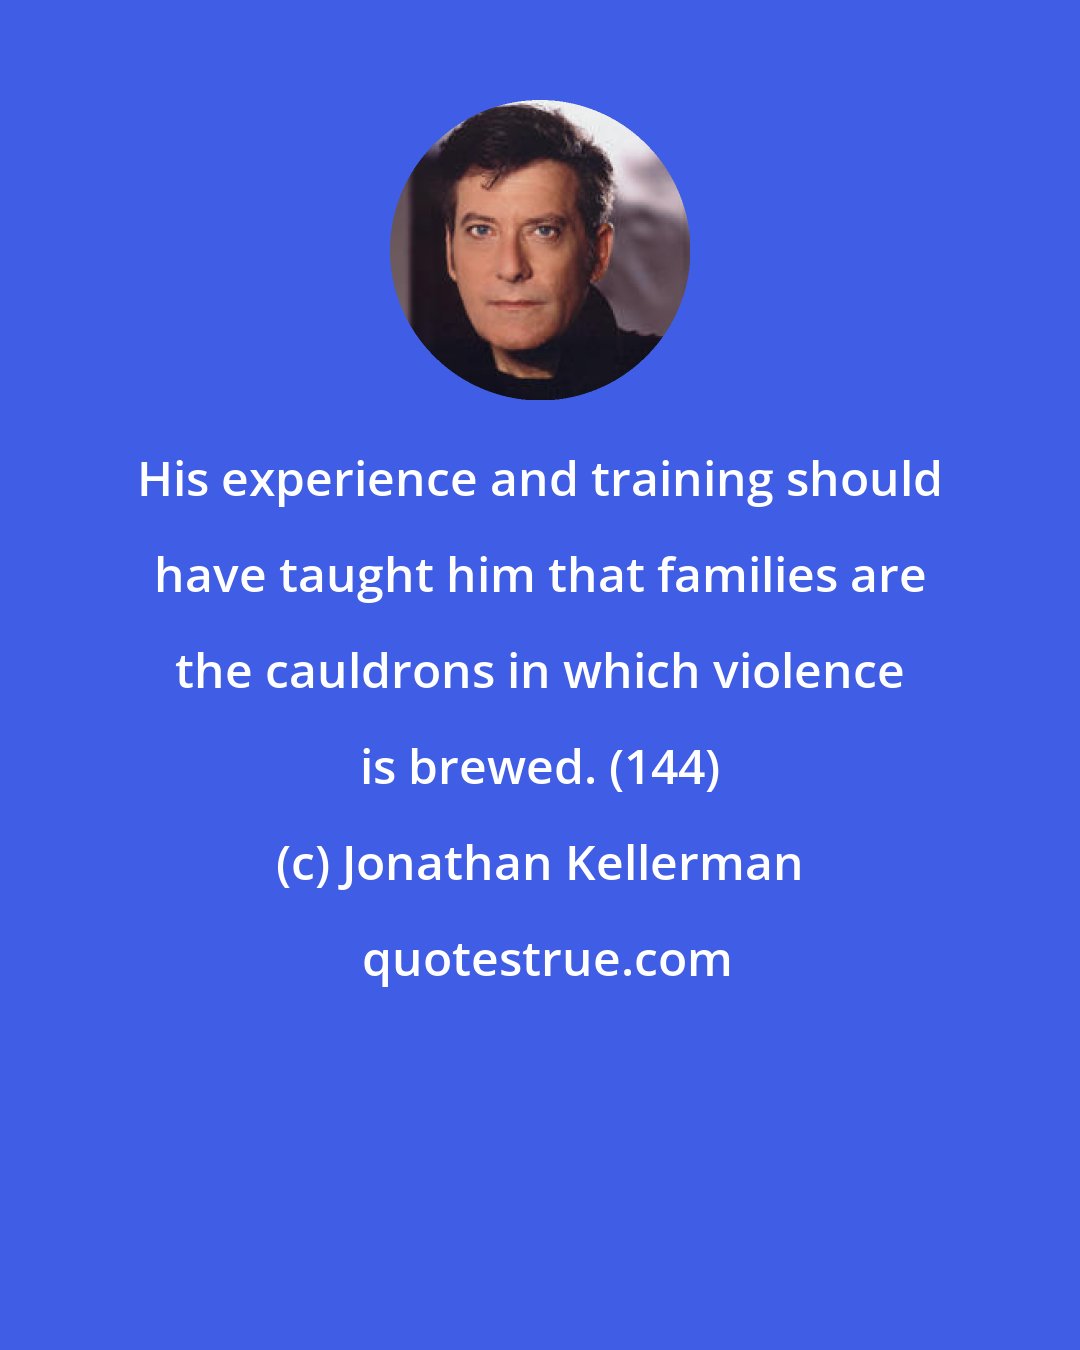 Jonathan Kellerman: His experience and training should have taught him that families are the cauldrons in which violence is brewed. (144)